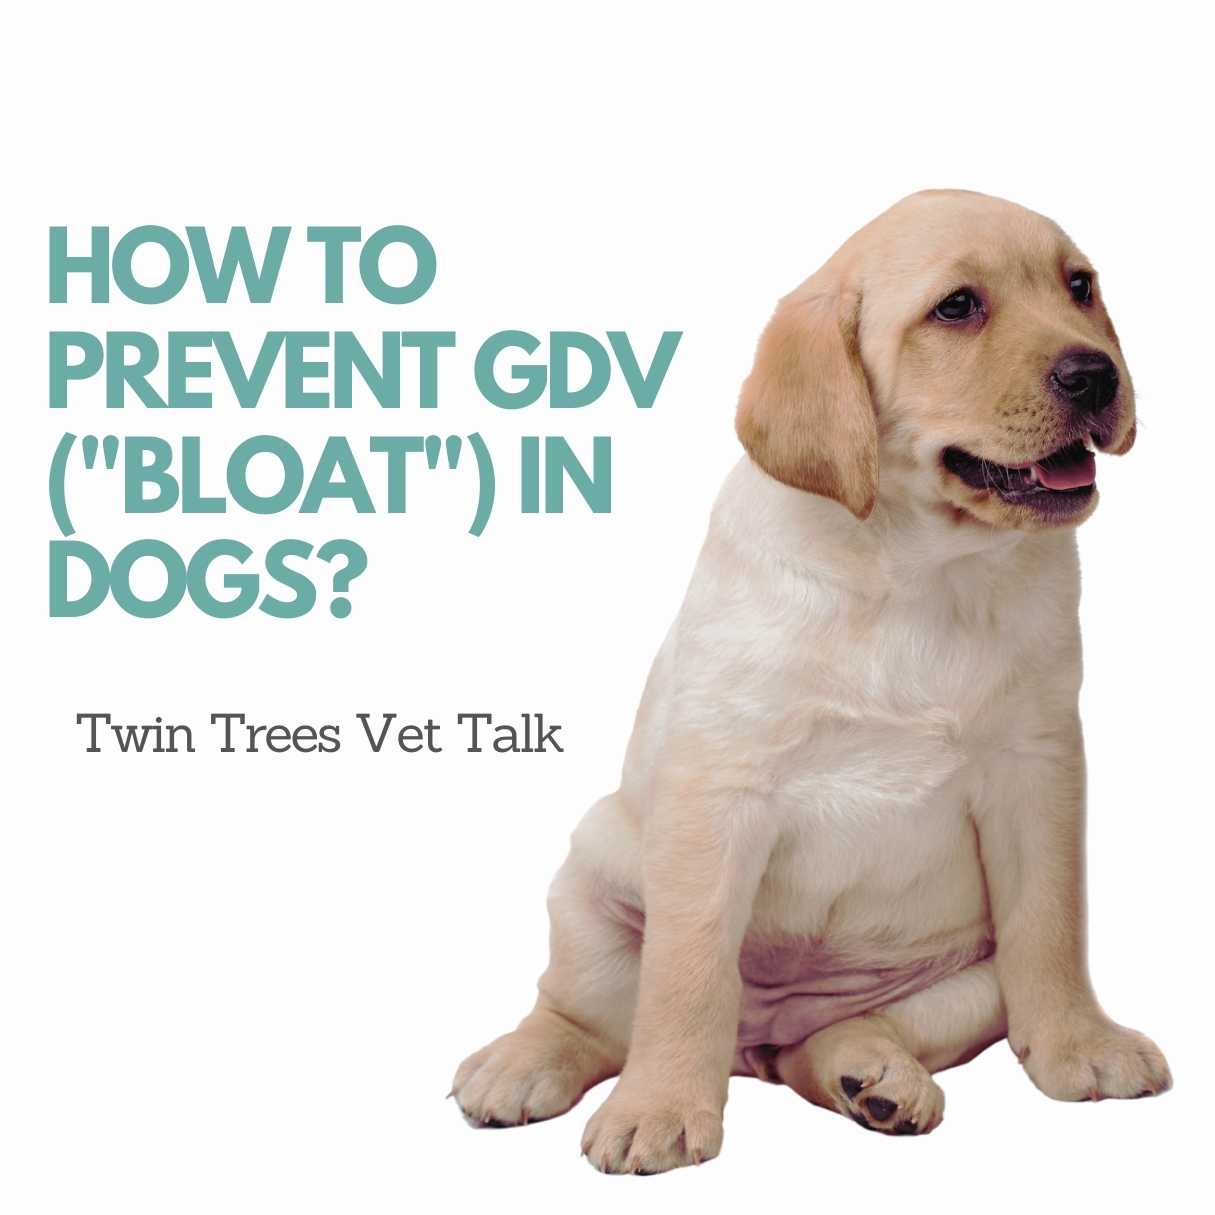 How to prevent GDV [a.k.a Bloat] in Dogs │ Twin Trees Vet Talk (FREE VET ADVICE PODCAST)